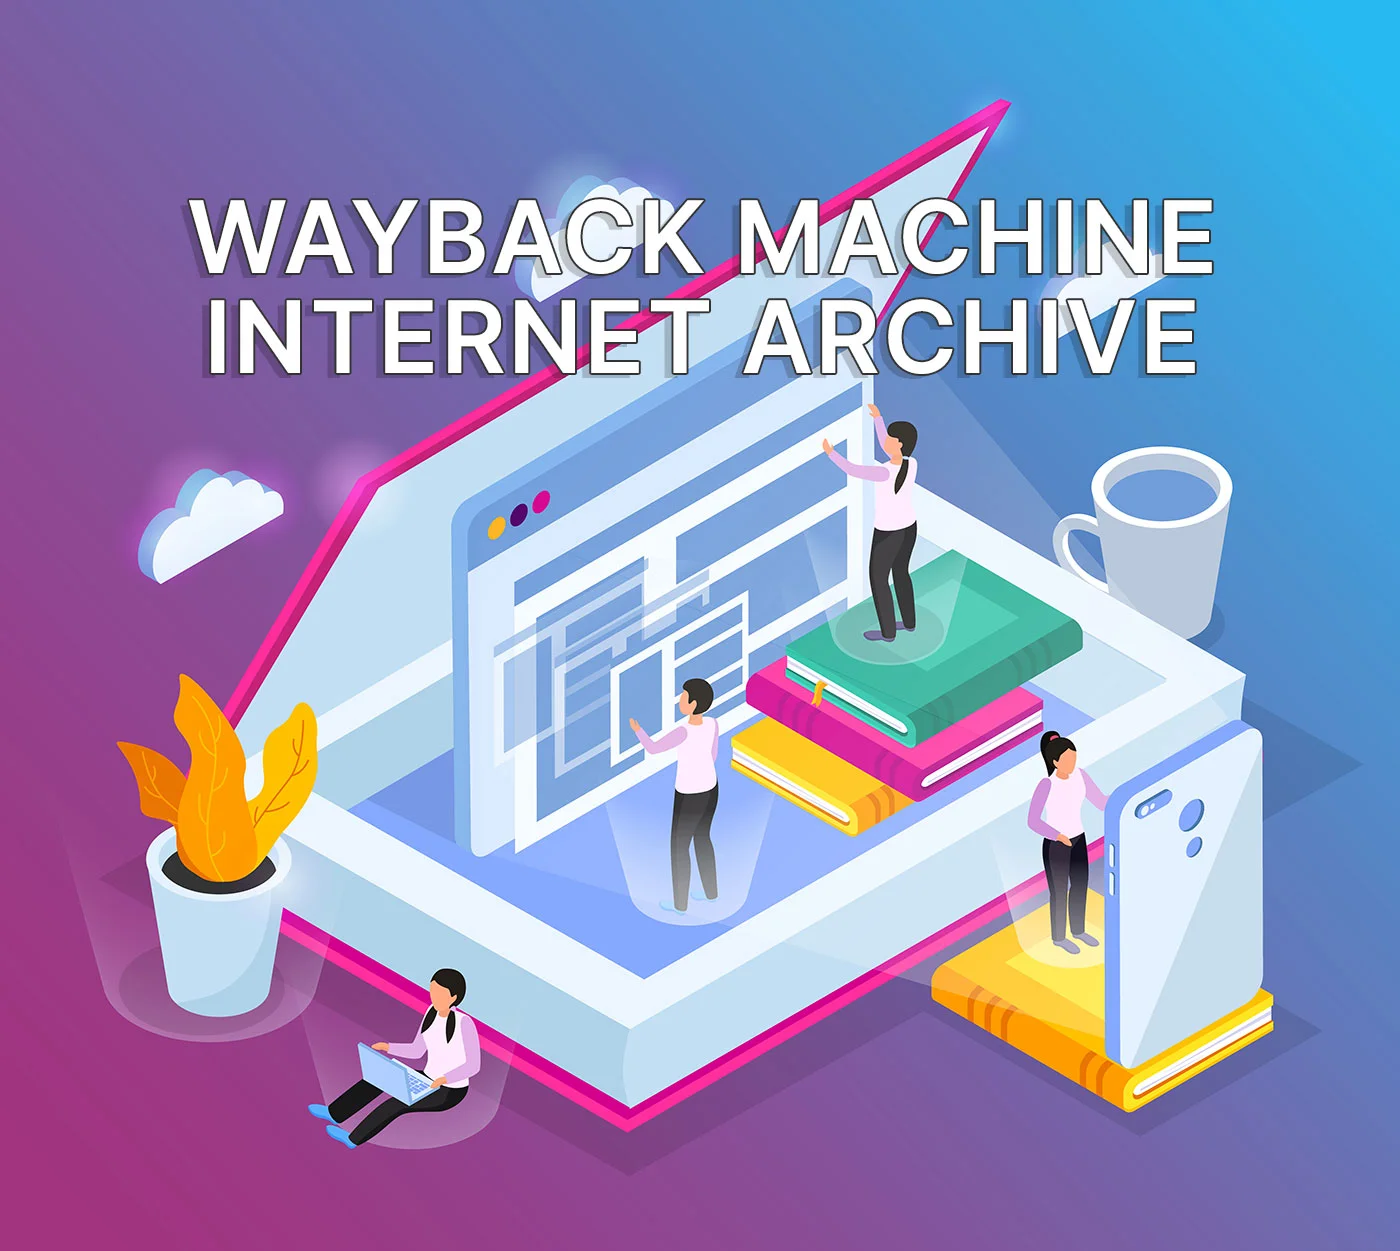 How to use the Wayback Machine to visit old websites